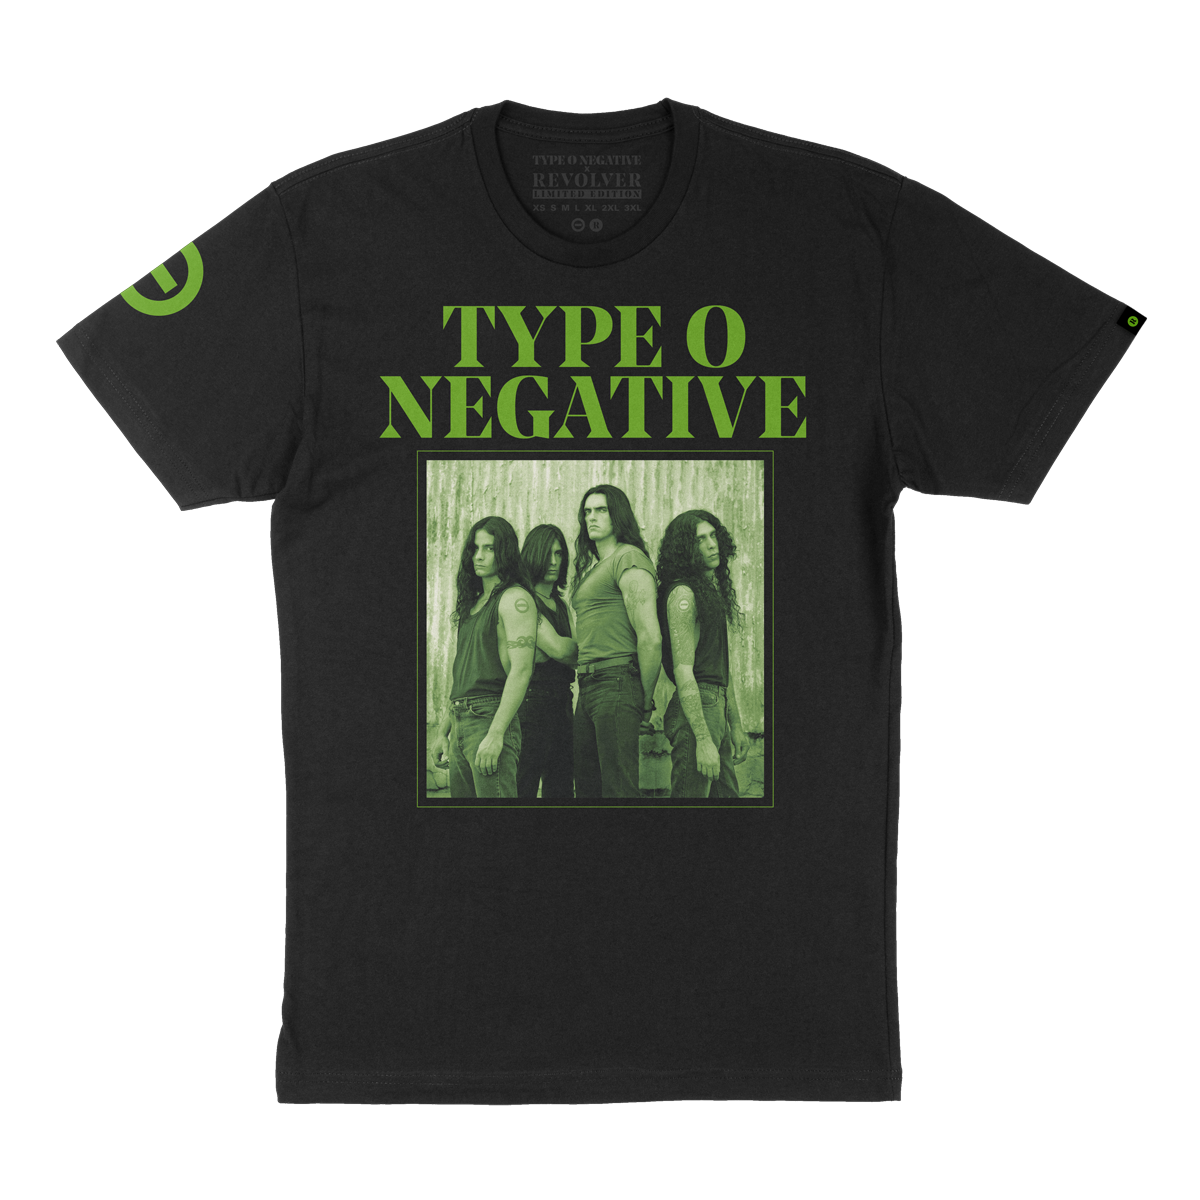 REVOLVER x TYPE O NEGATIVE 'BLOODY KISSES' V2 LIMITED-EDITION NUMBERED T-SHIRT